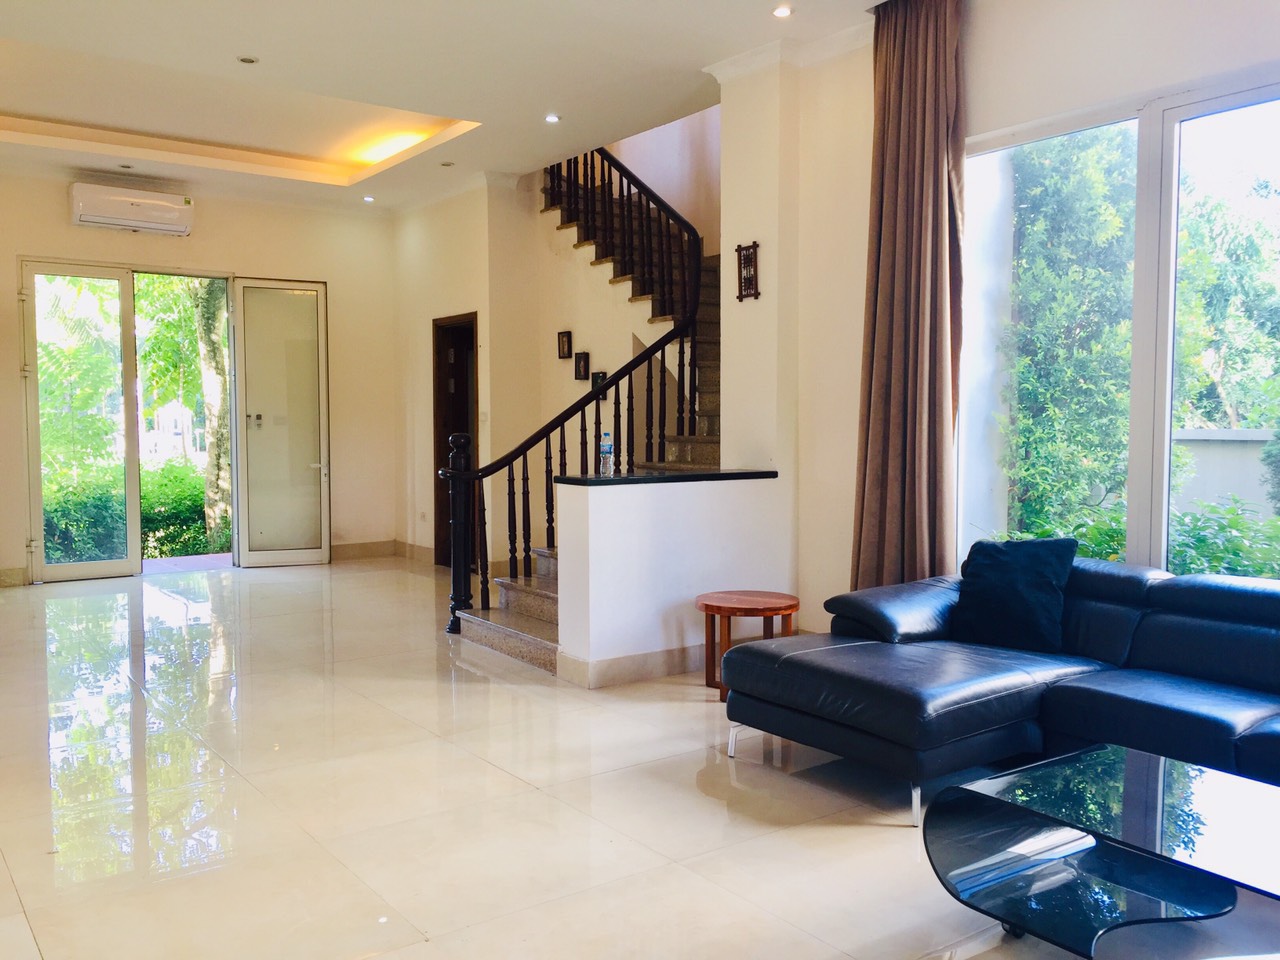 Villa in Hoa Phuong Vinhome Riverside basic interior for rent only 1300 usd/ month